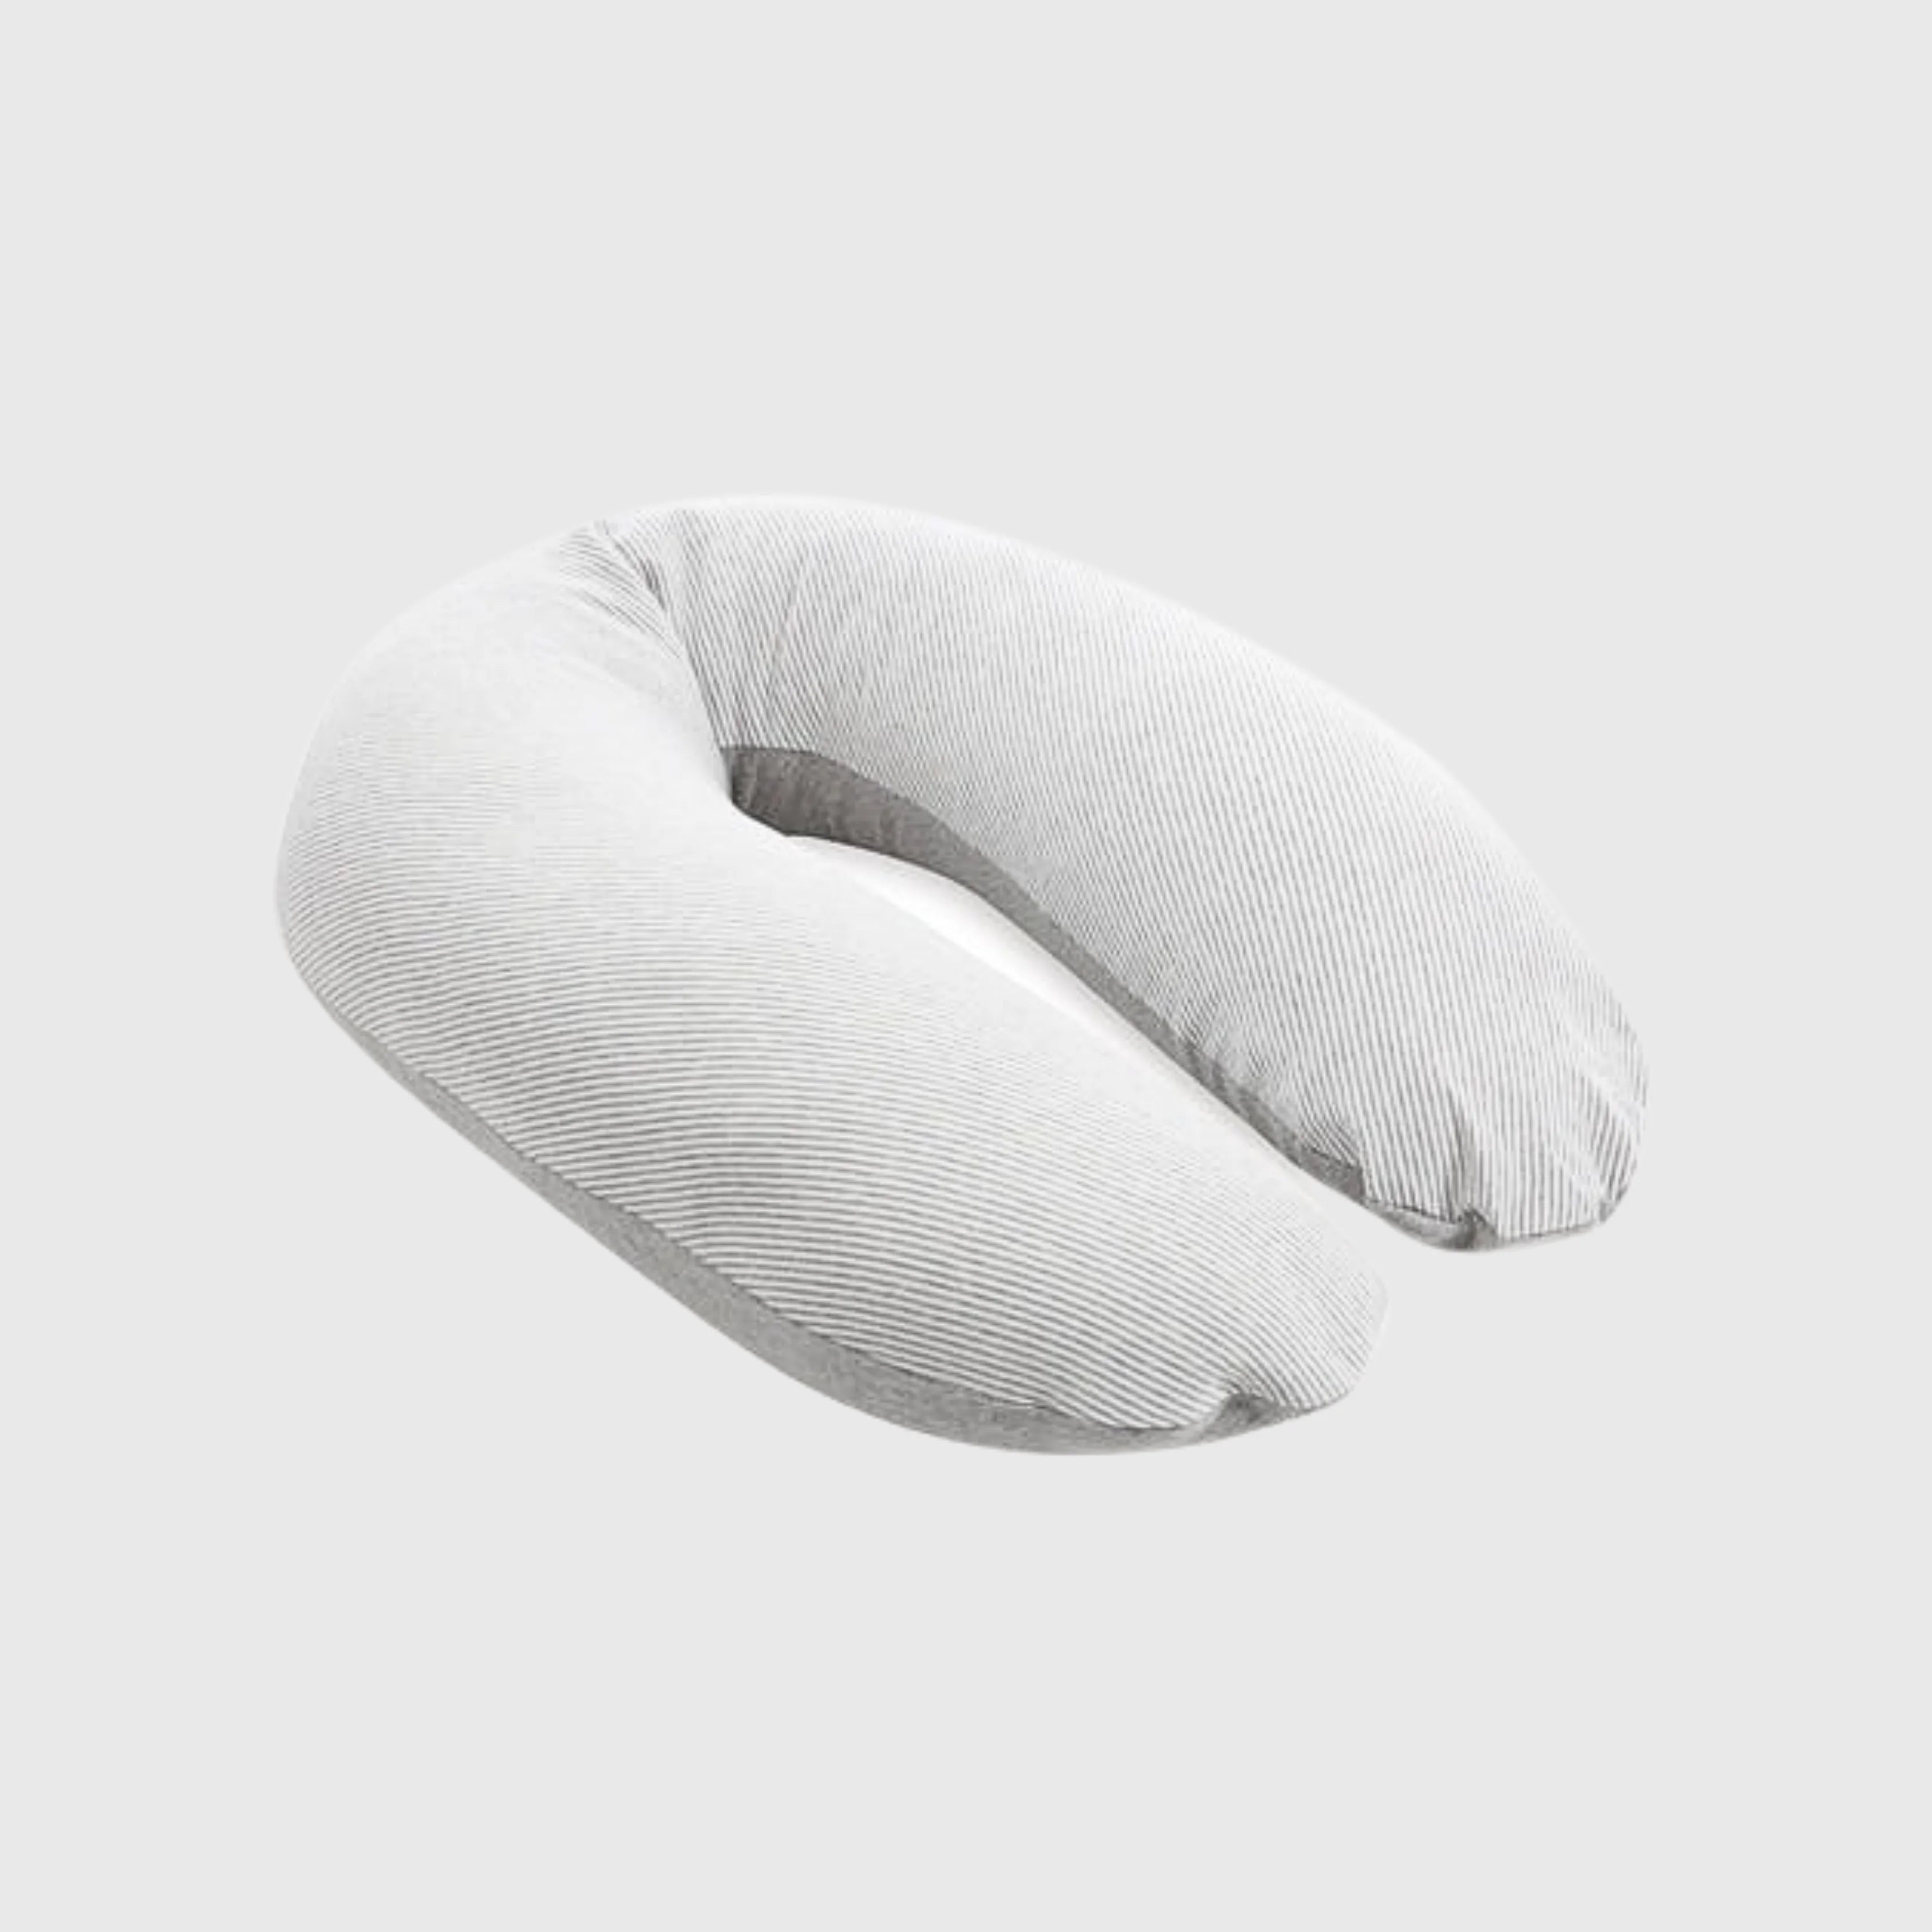 Theraline - MY 7 BY THERALINE - L'oreiller de grossesse et coussin